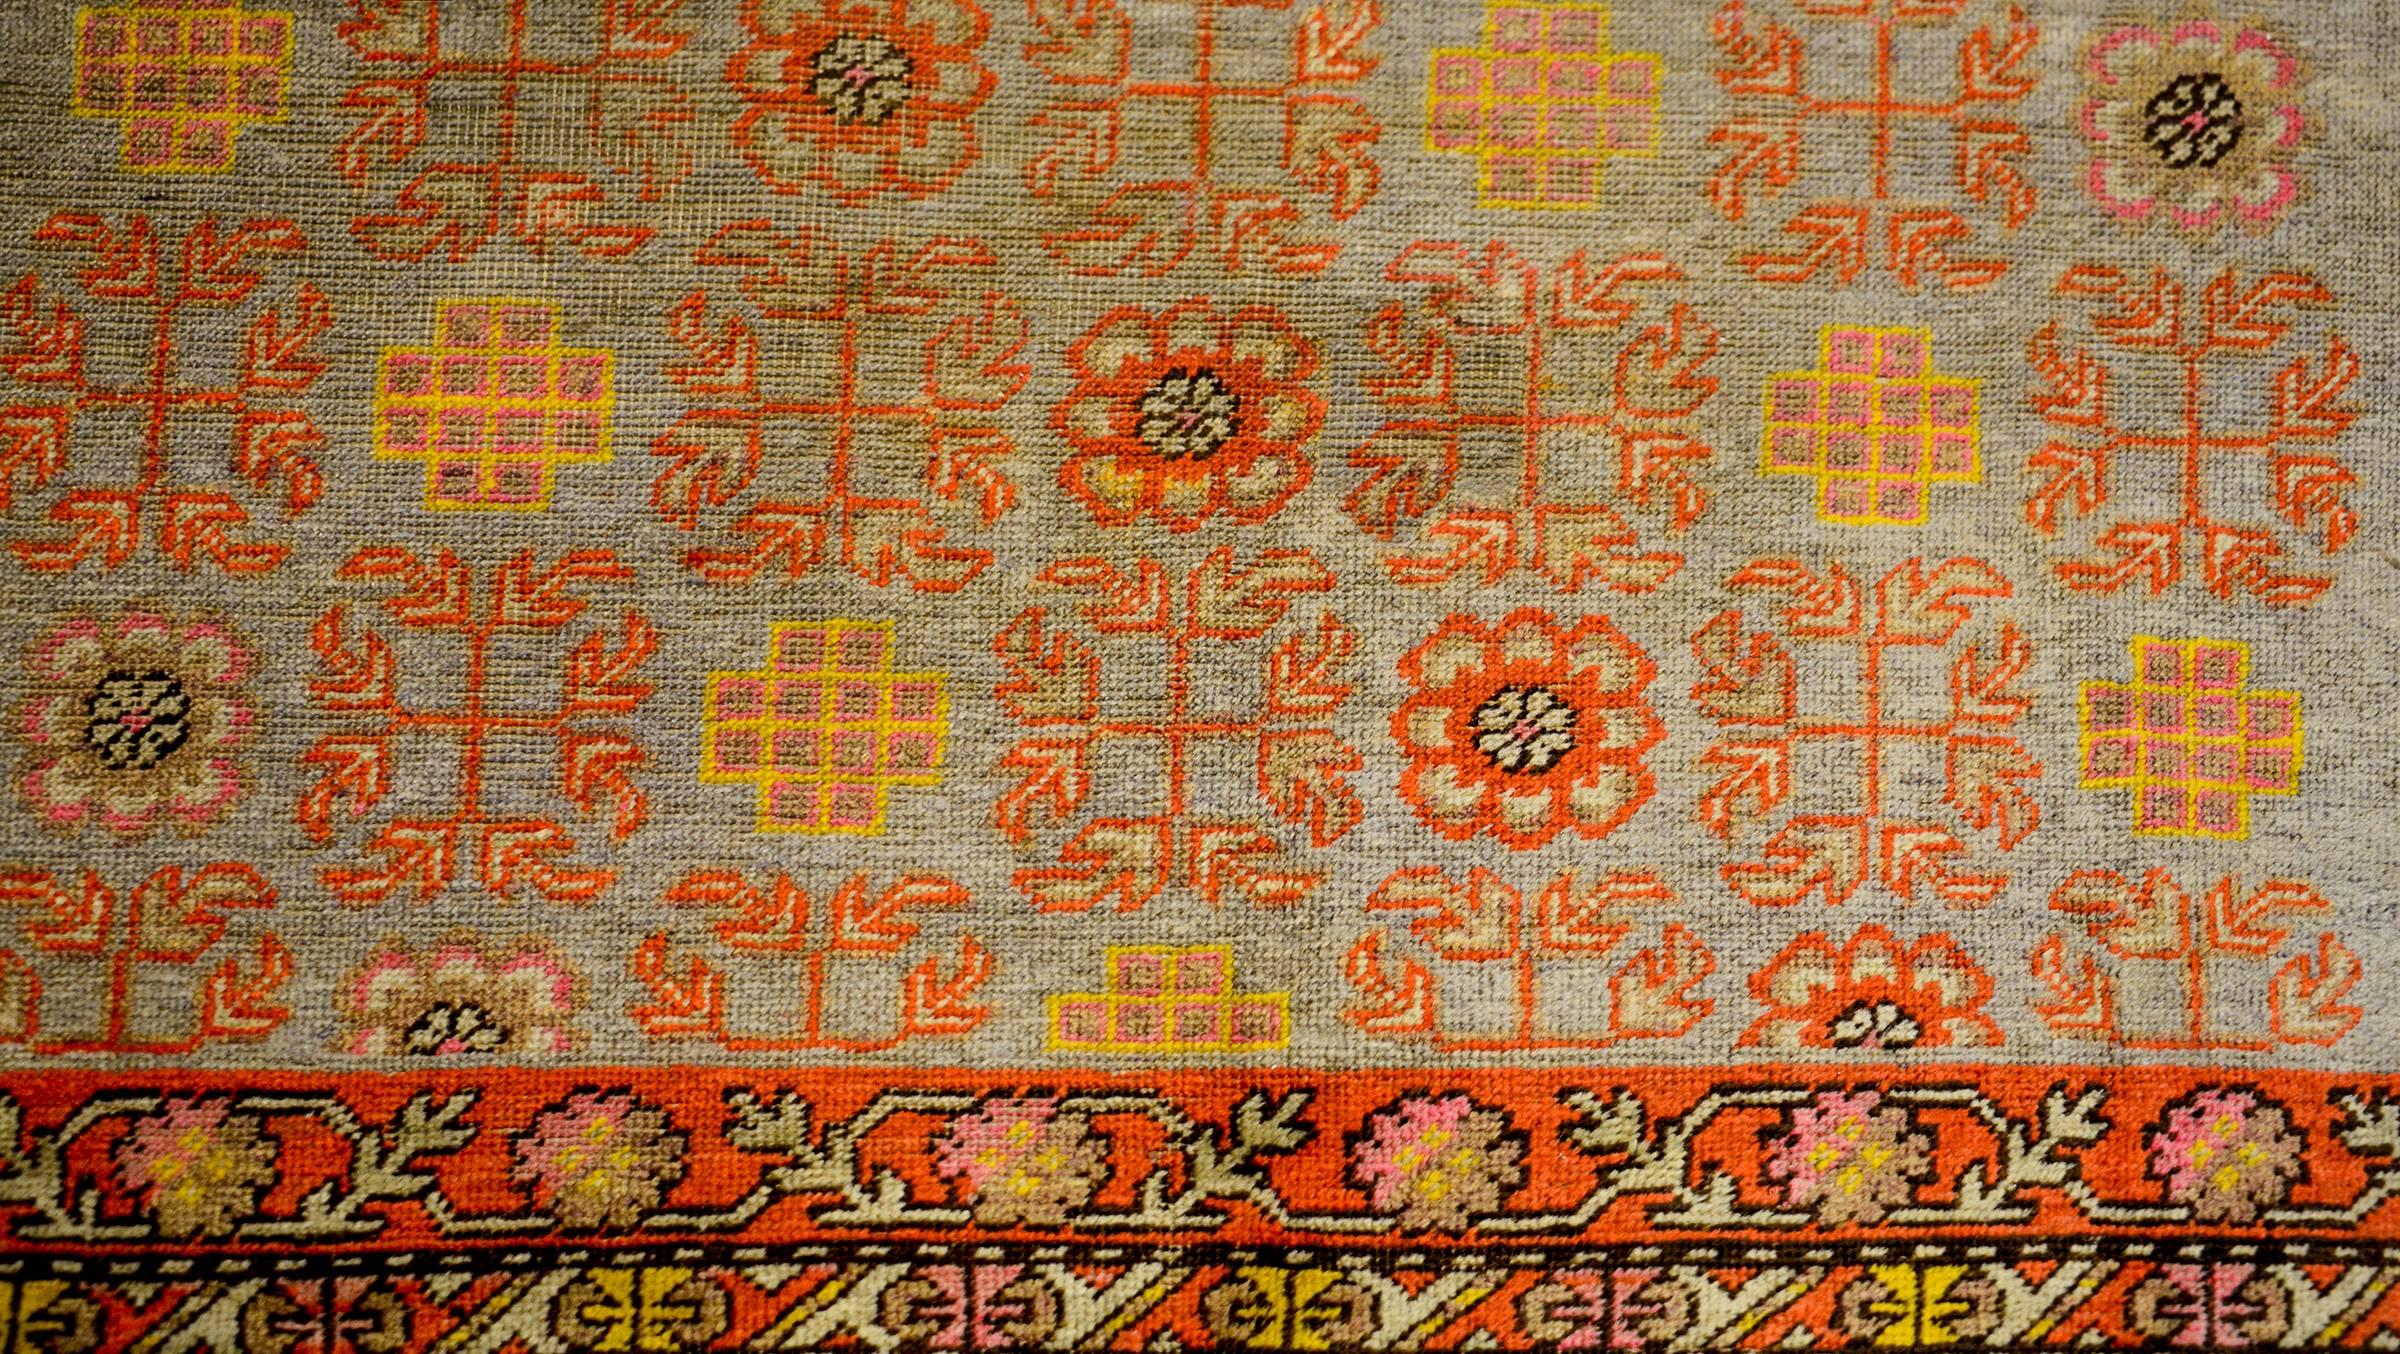 A wonderful early 20th century Central Asian Khotan rug with a beautiful all-over partern with alternating floral, leaf and endless-knot motifs, woven in rich crimson, gold, pink and green vegetable dyed wool, on a pale indigo background. The border